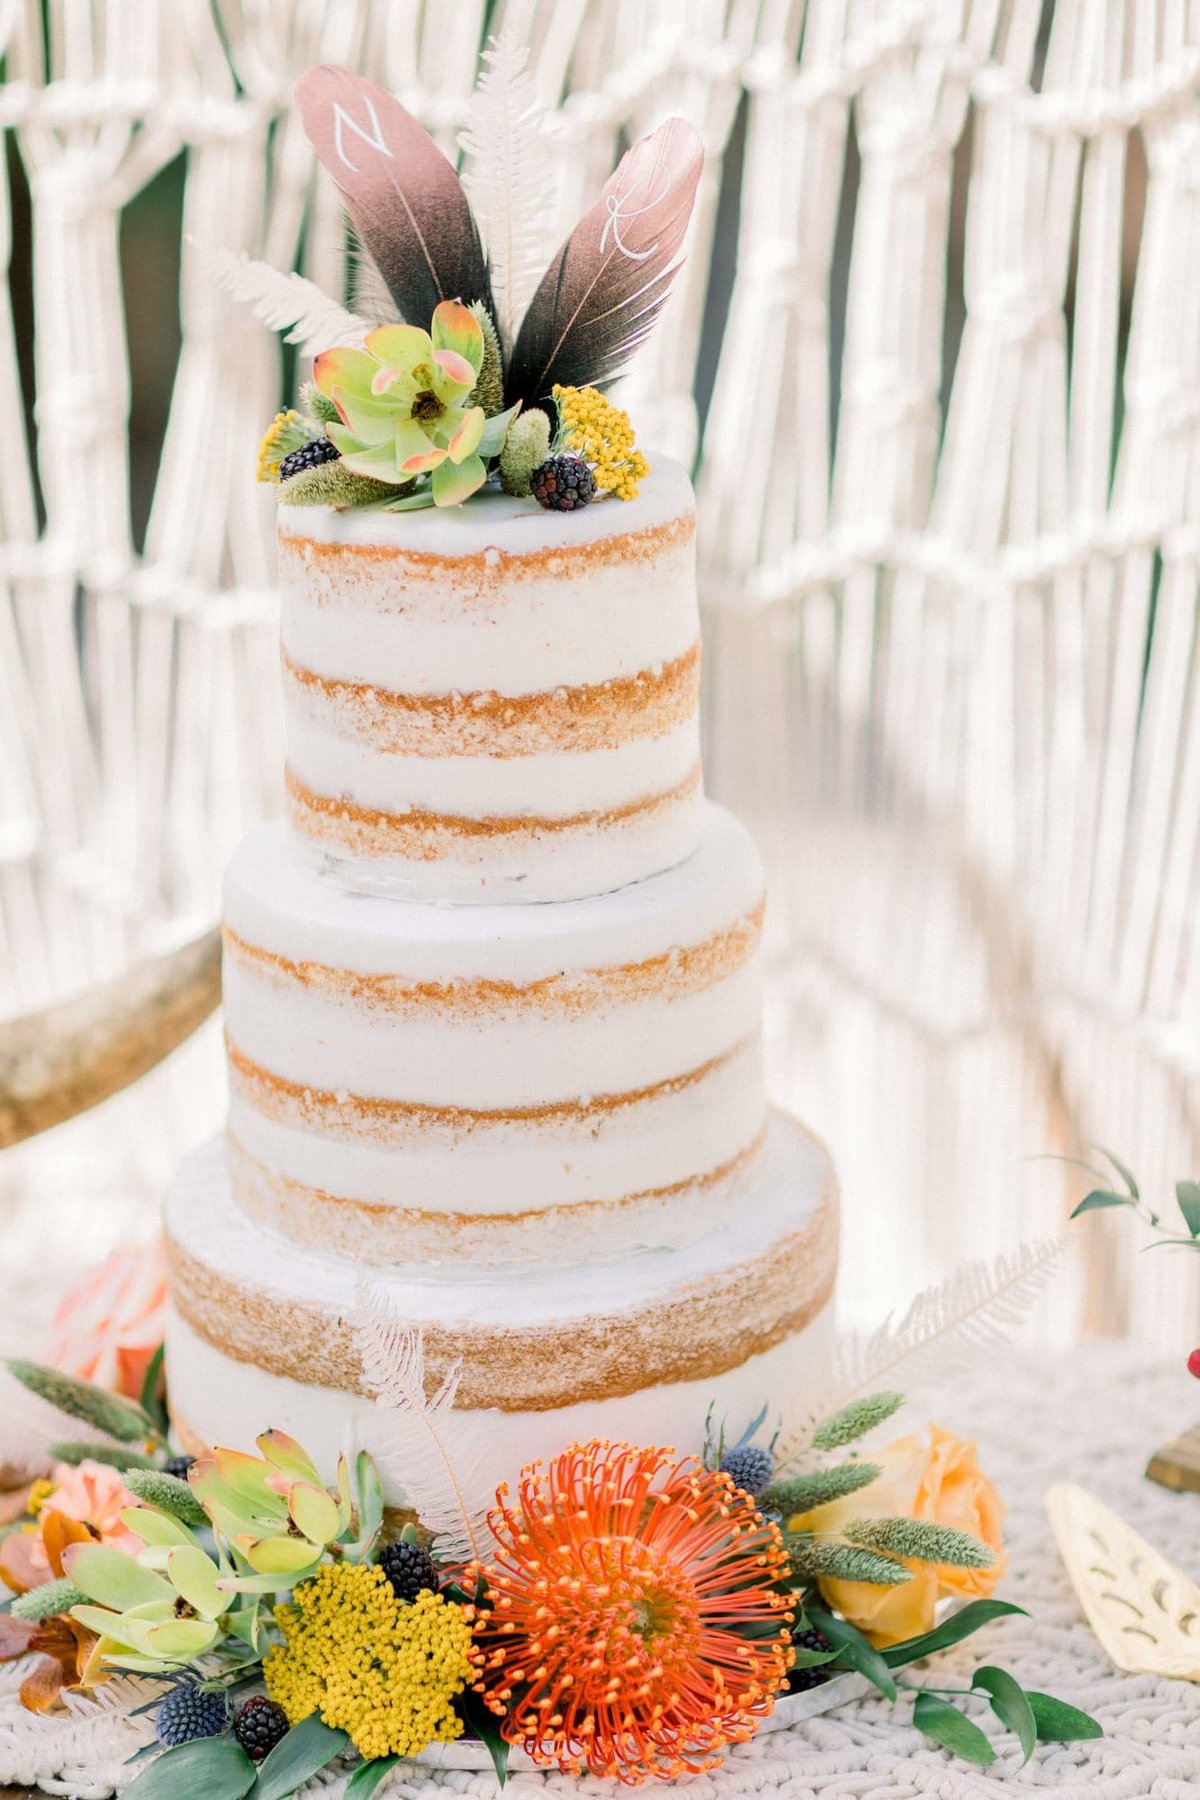 Beautiful 3-tiered white naked wedding cake decorated with an array of flowers